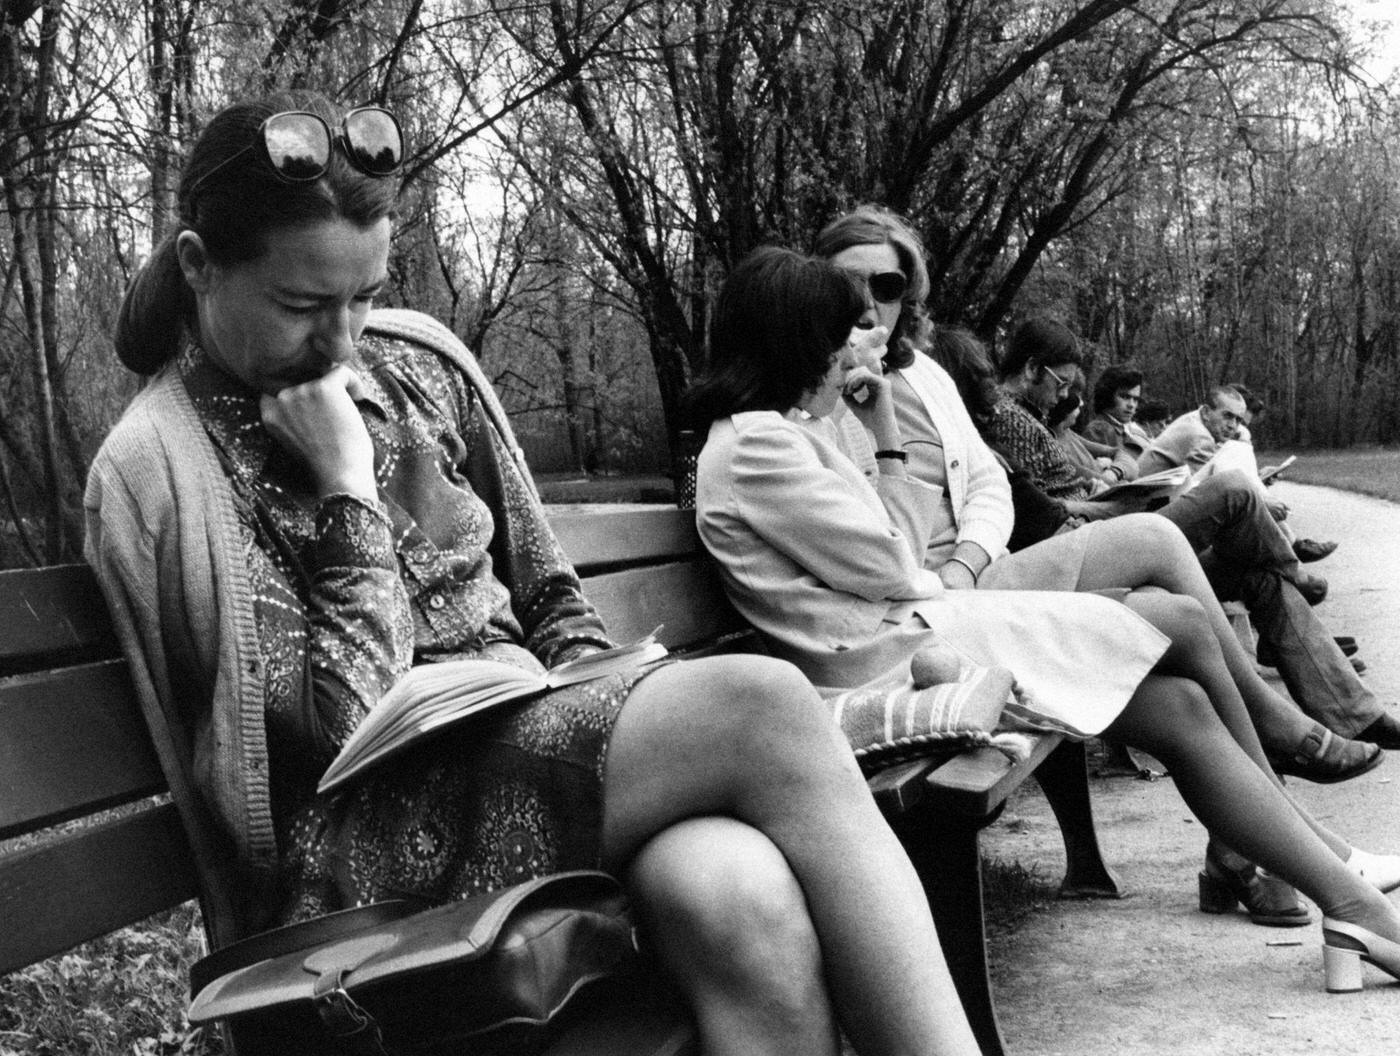 German woman reading a book on a bench in a park in Hamburg, Germany in 1973.